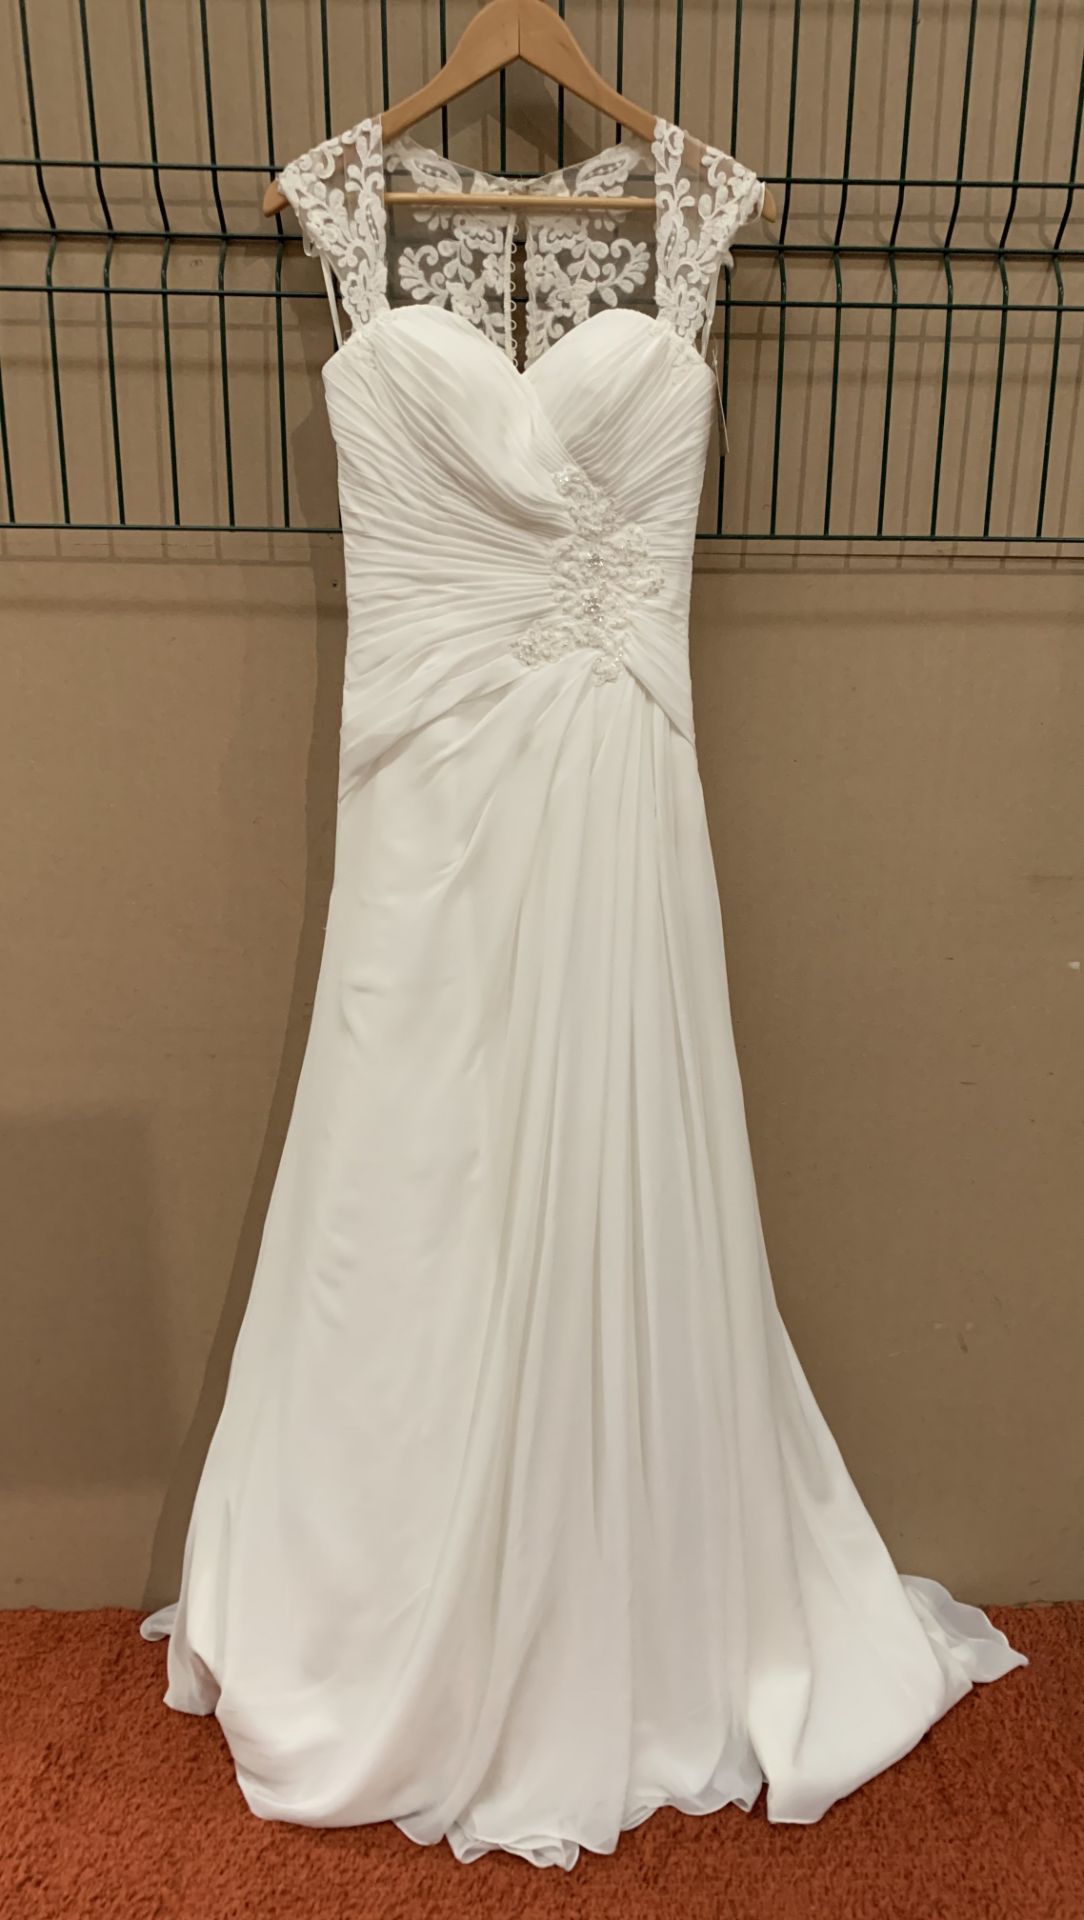 A wedding dress by Romantica, Milan Collection, model WW323, ivory, size 8,